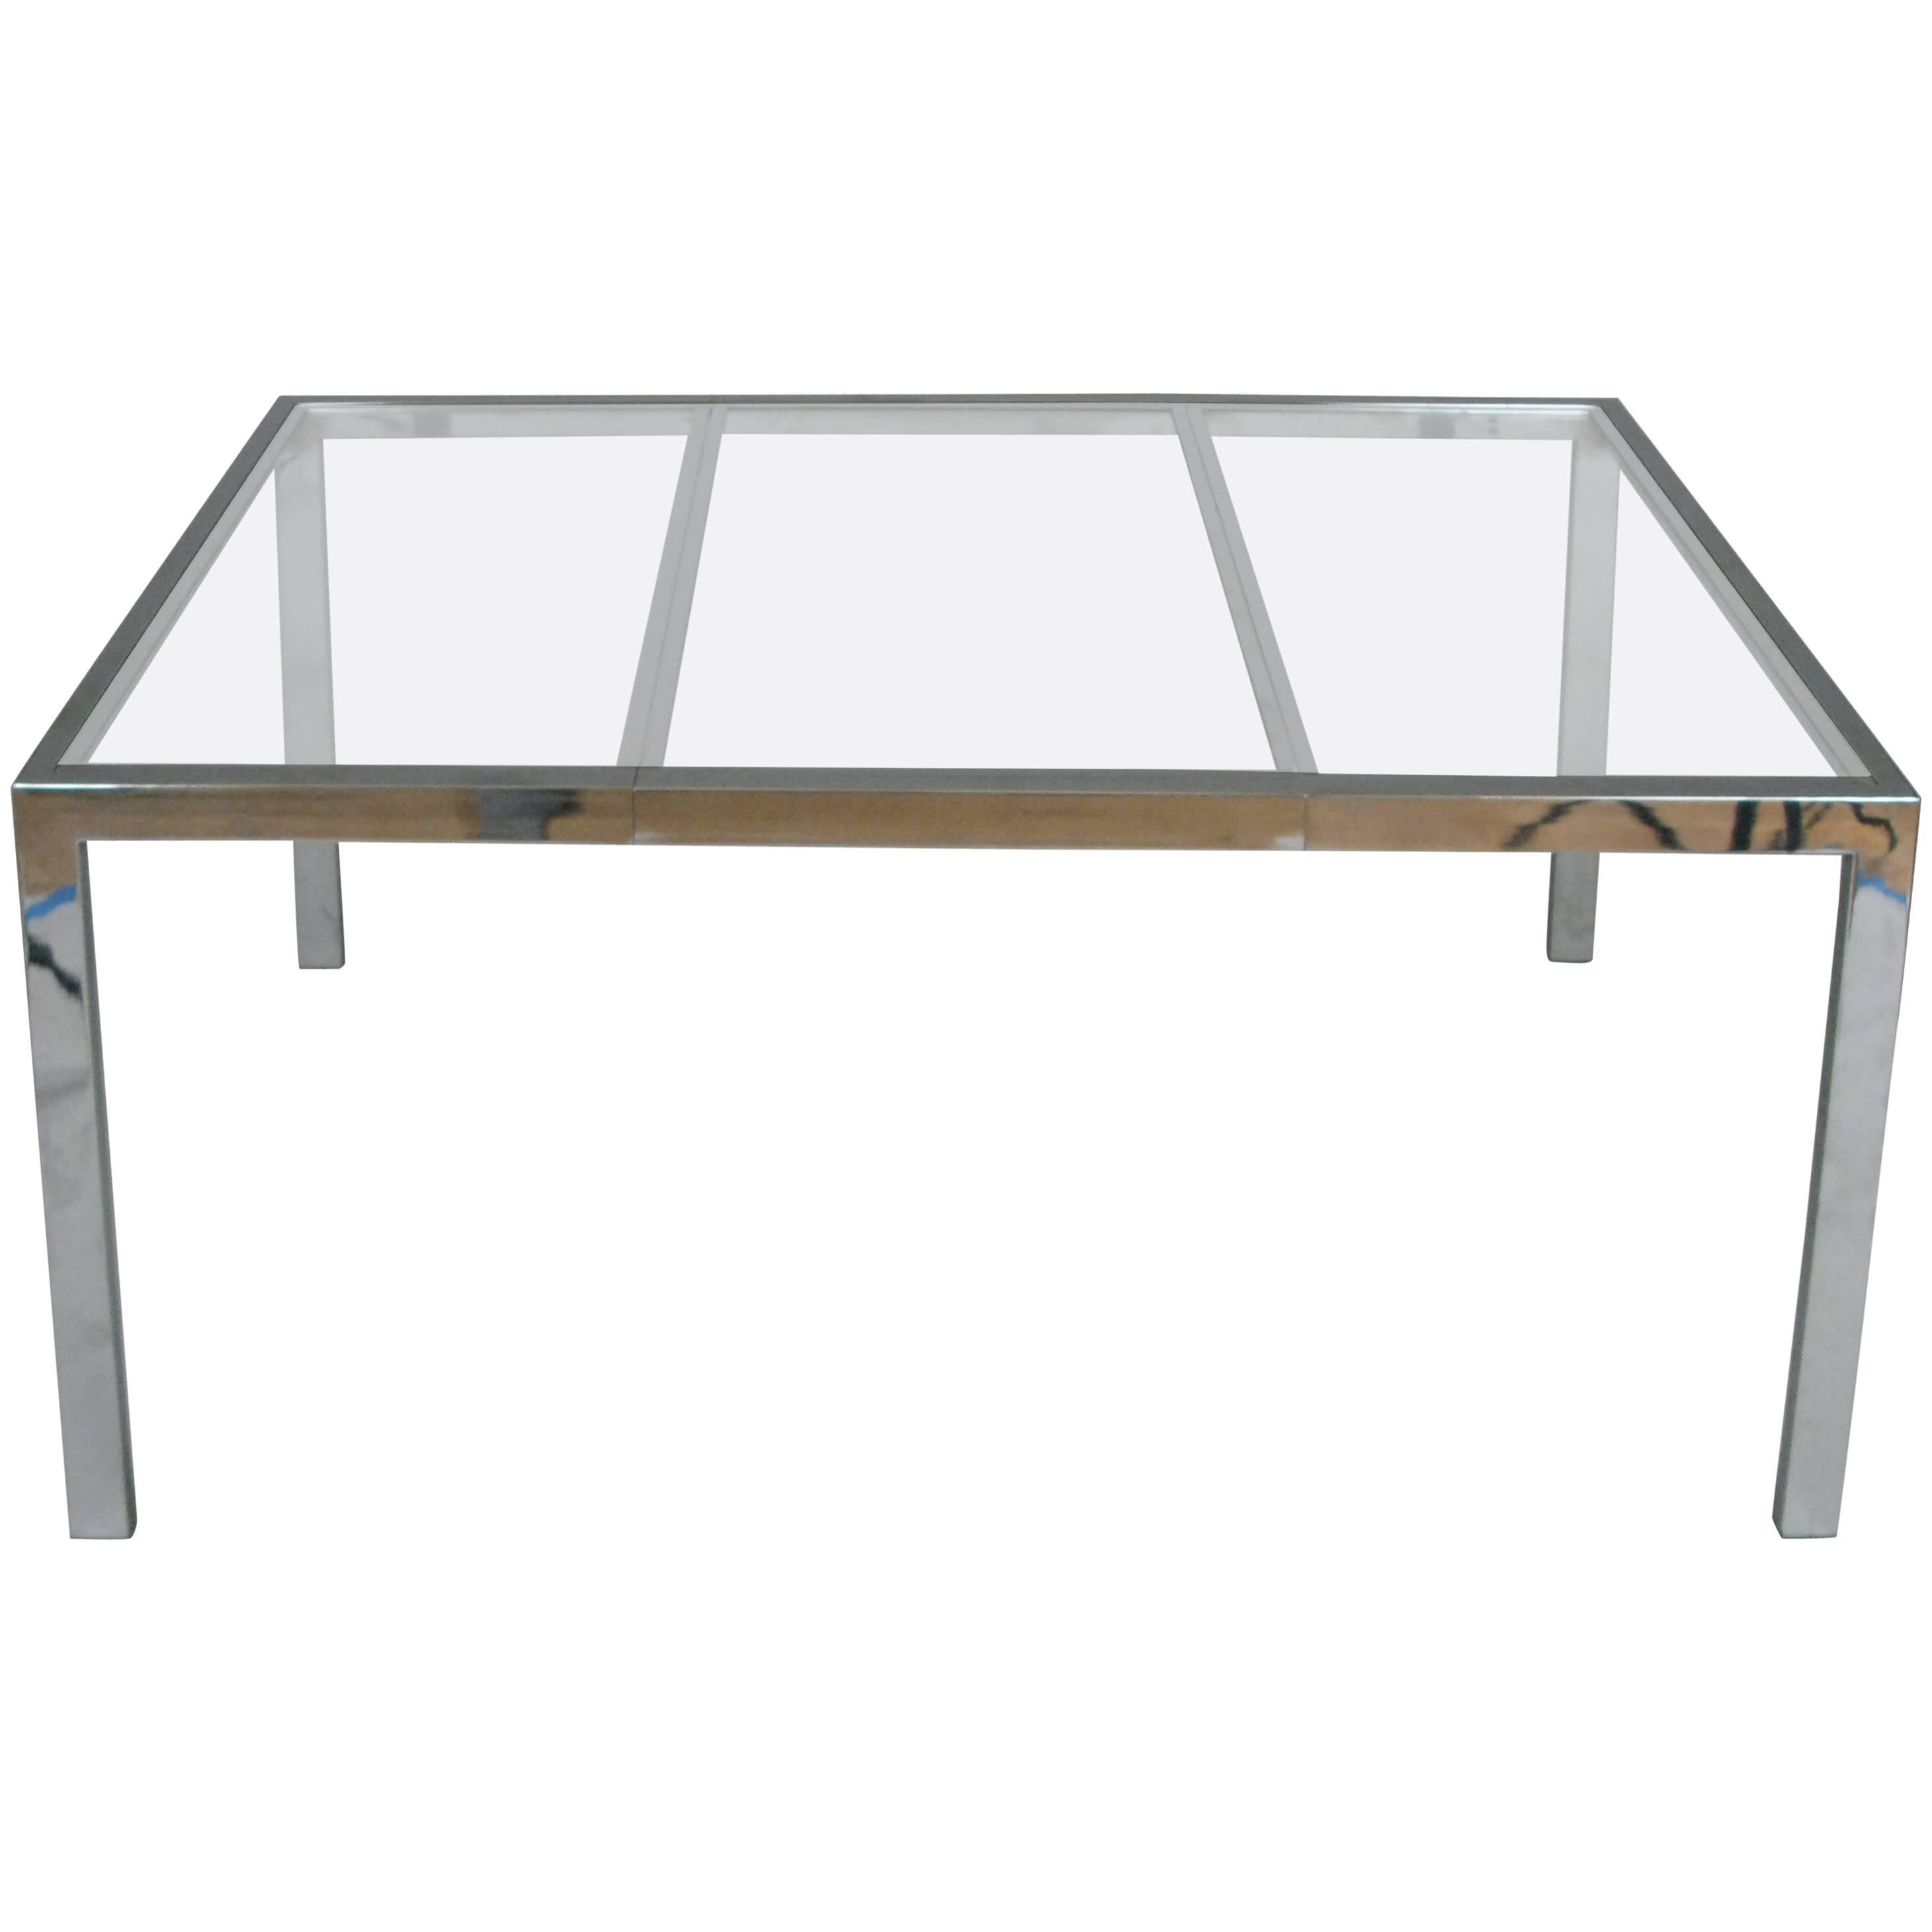 Vintage 1970s Chrome and Glass Extension Dining Table